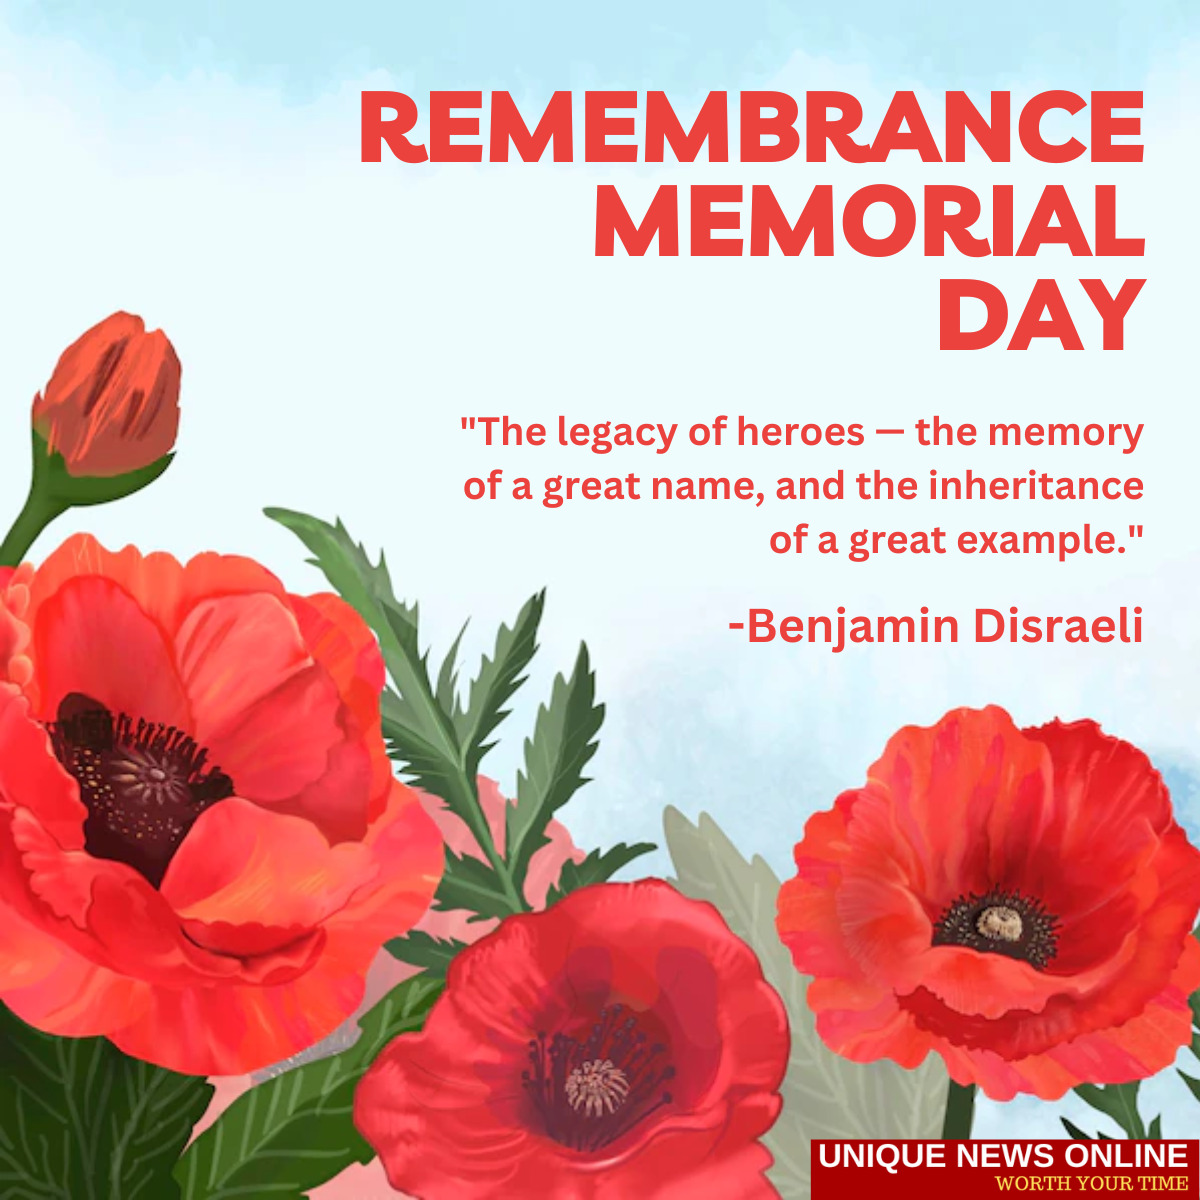 Remembrance Memorial Day 2022 Wishes, Poems, Quotes, Sayings